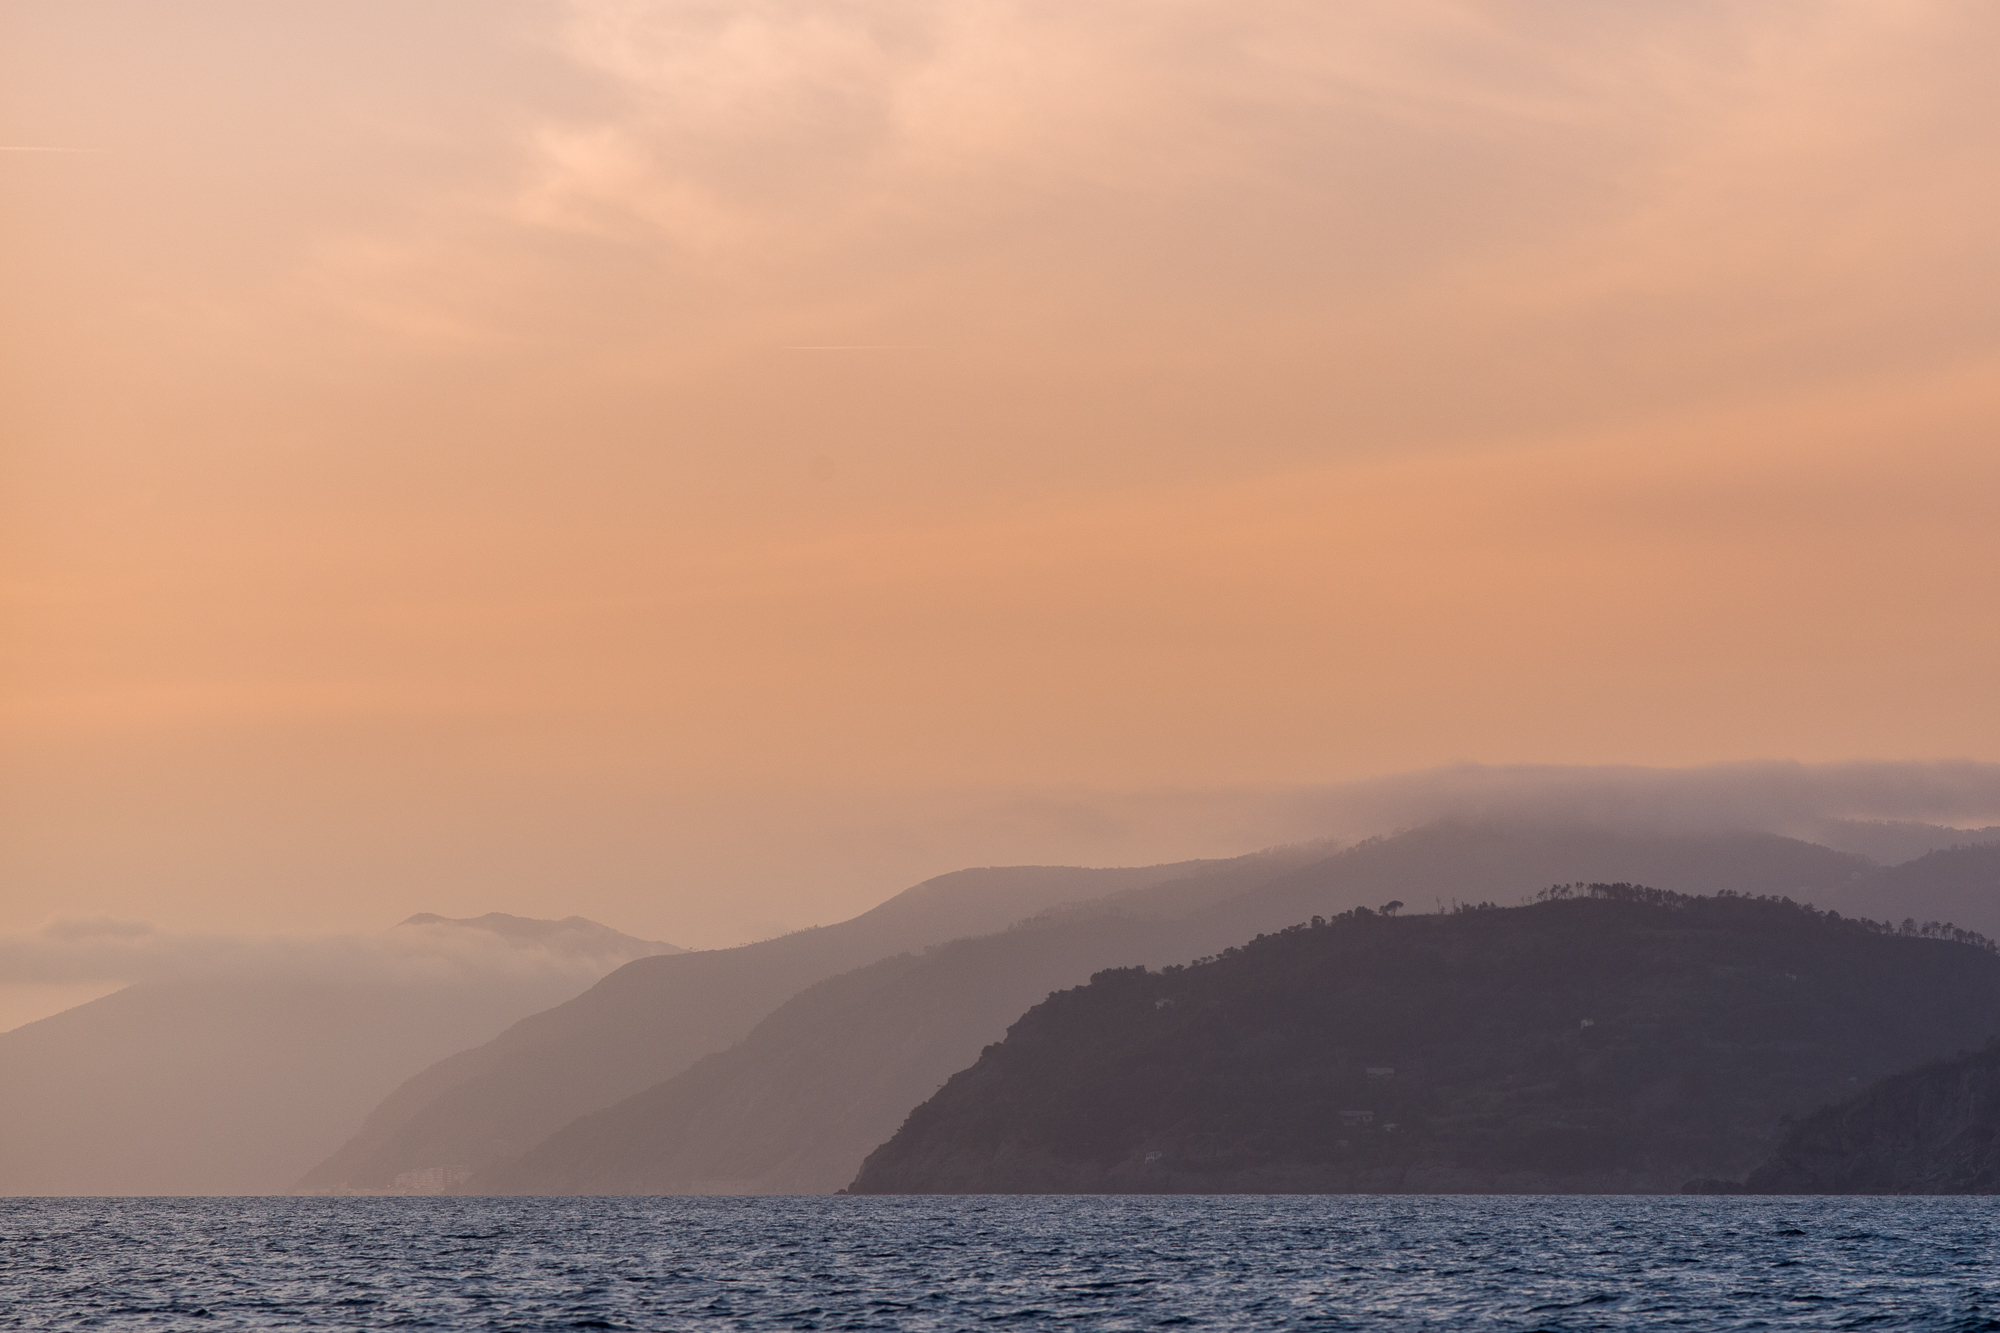  The coastline of Cinque Terre viewed from the sea 